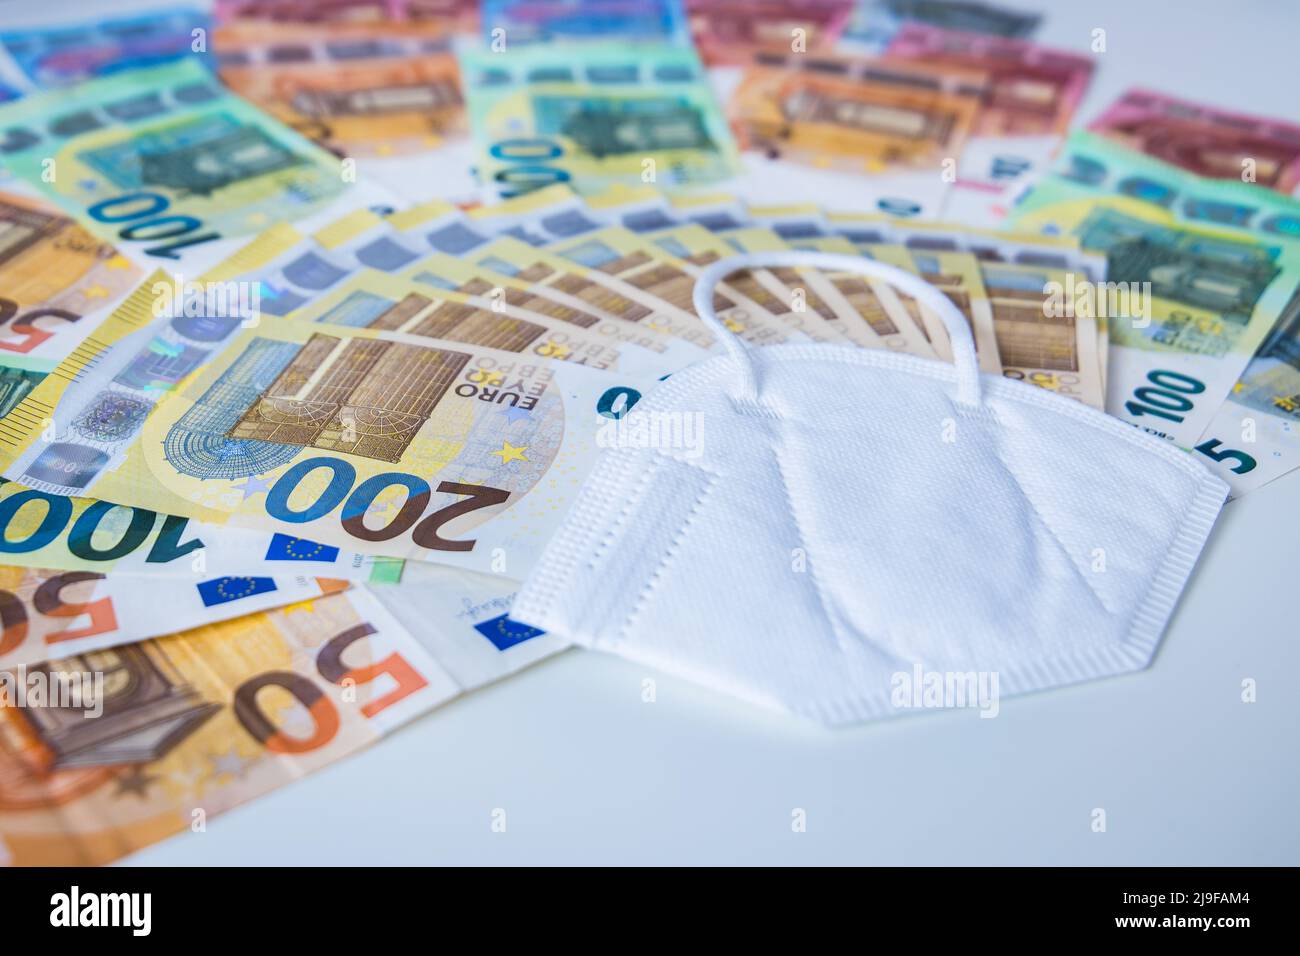 Corona face mask with a bundle of Euro banknotes Stock Photo